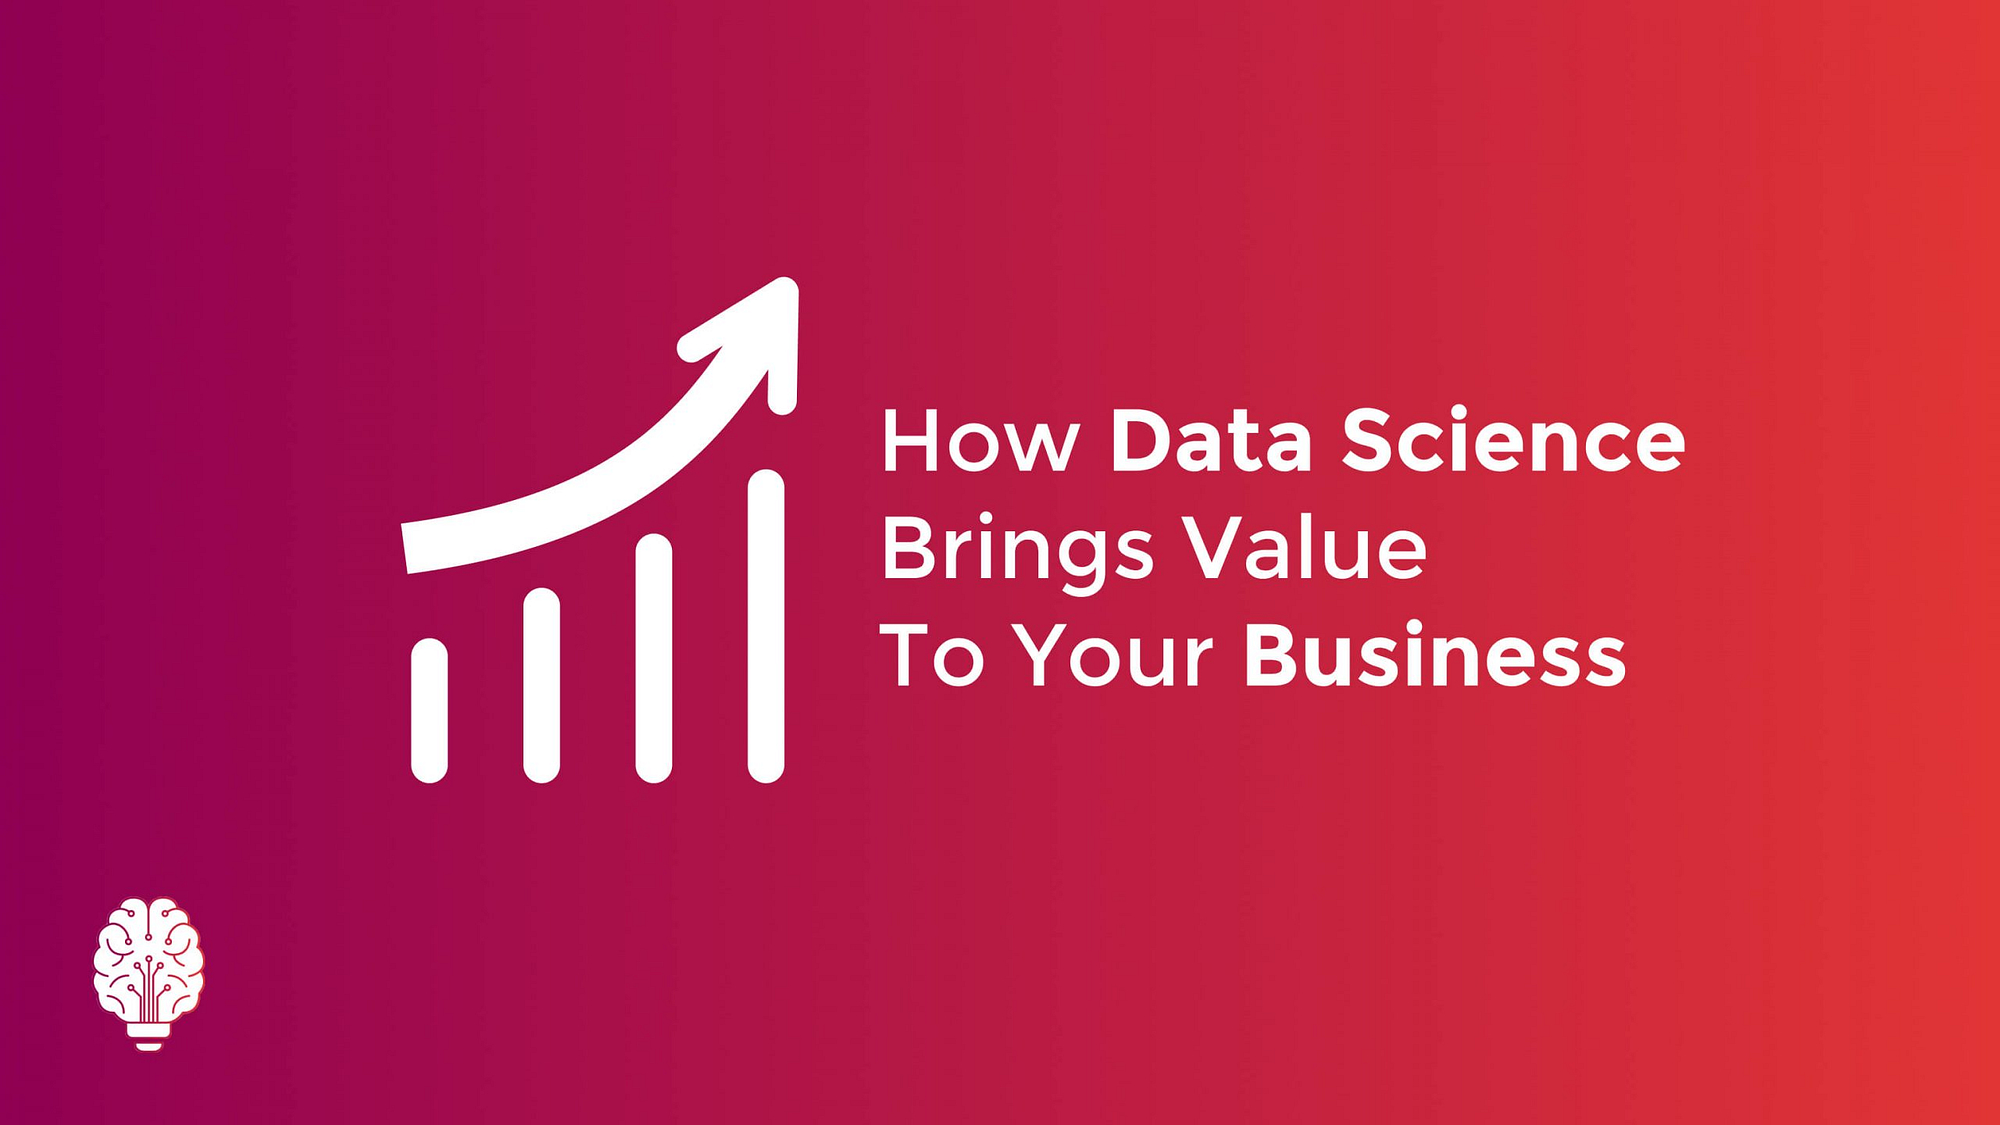 How Data Science Brings Value To Your Business